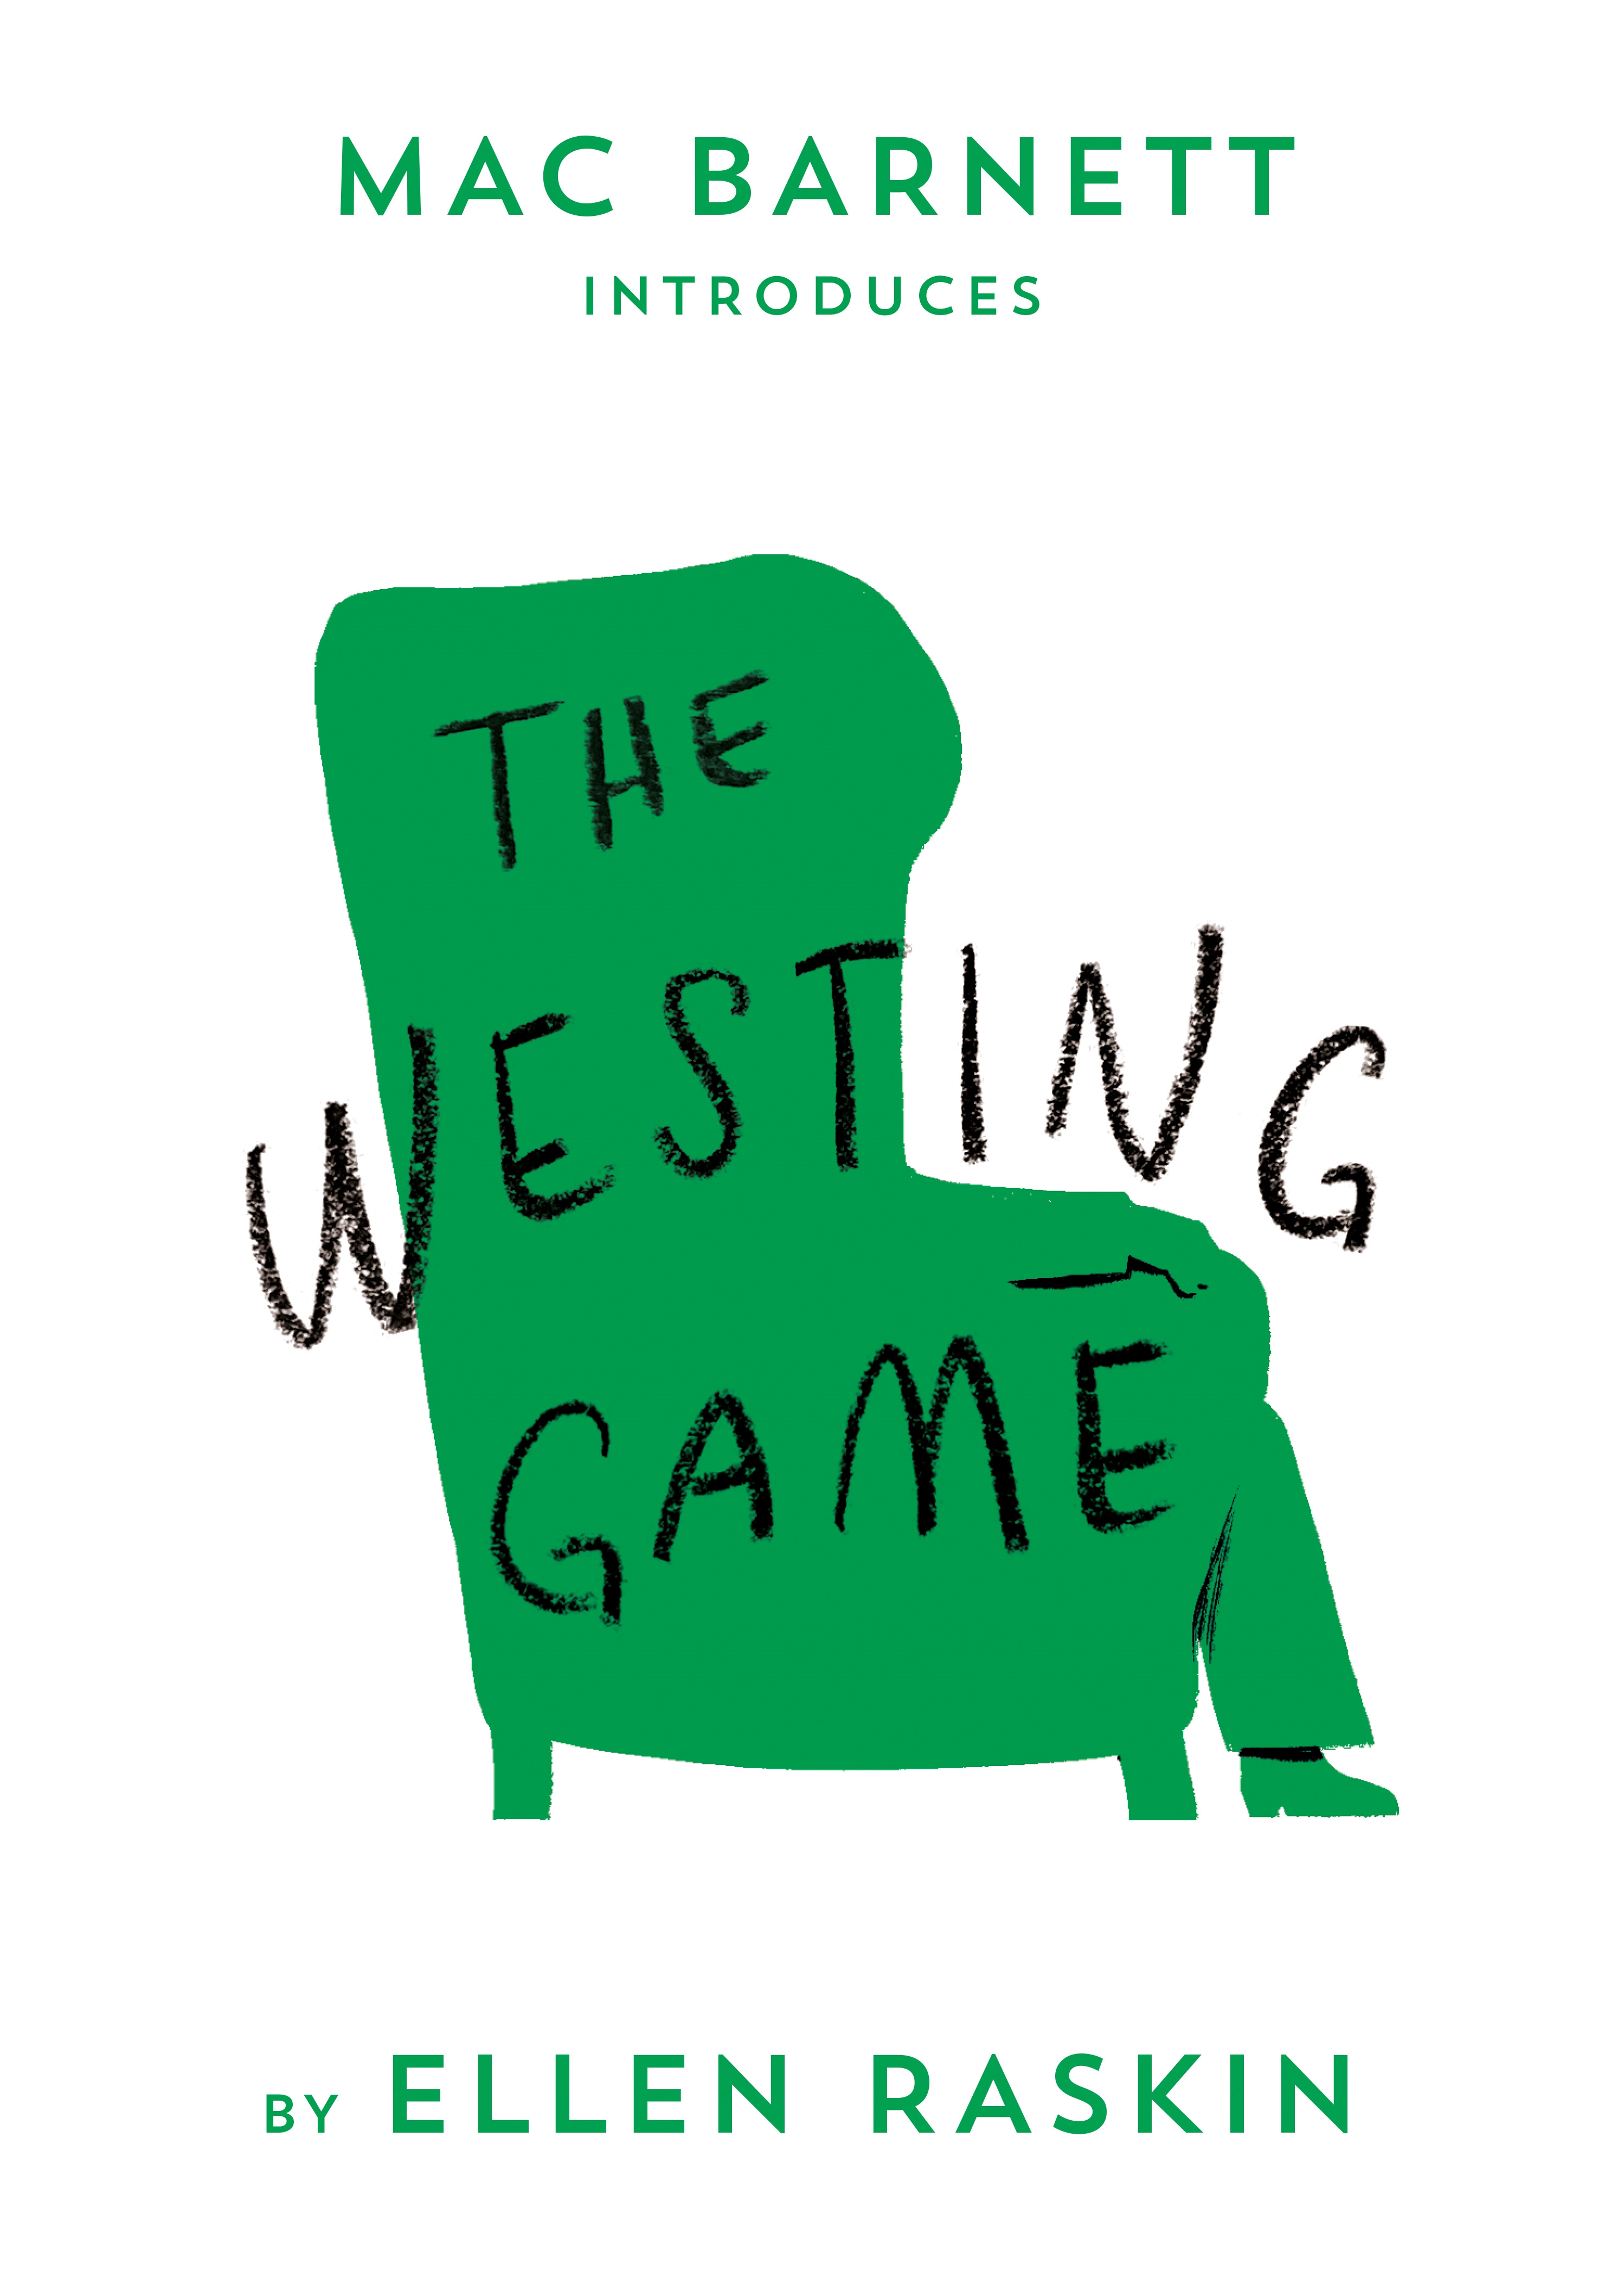 book review of the westing game